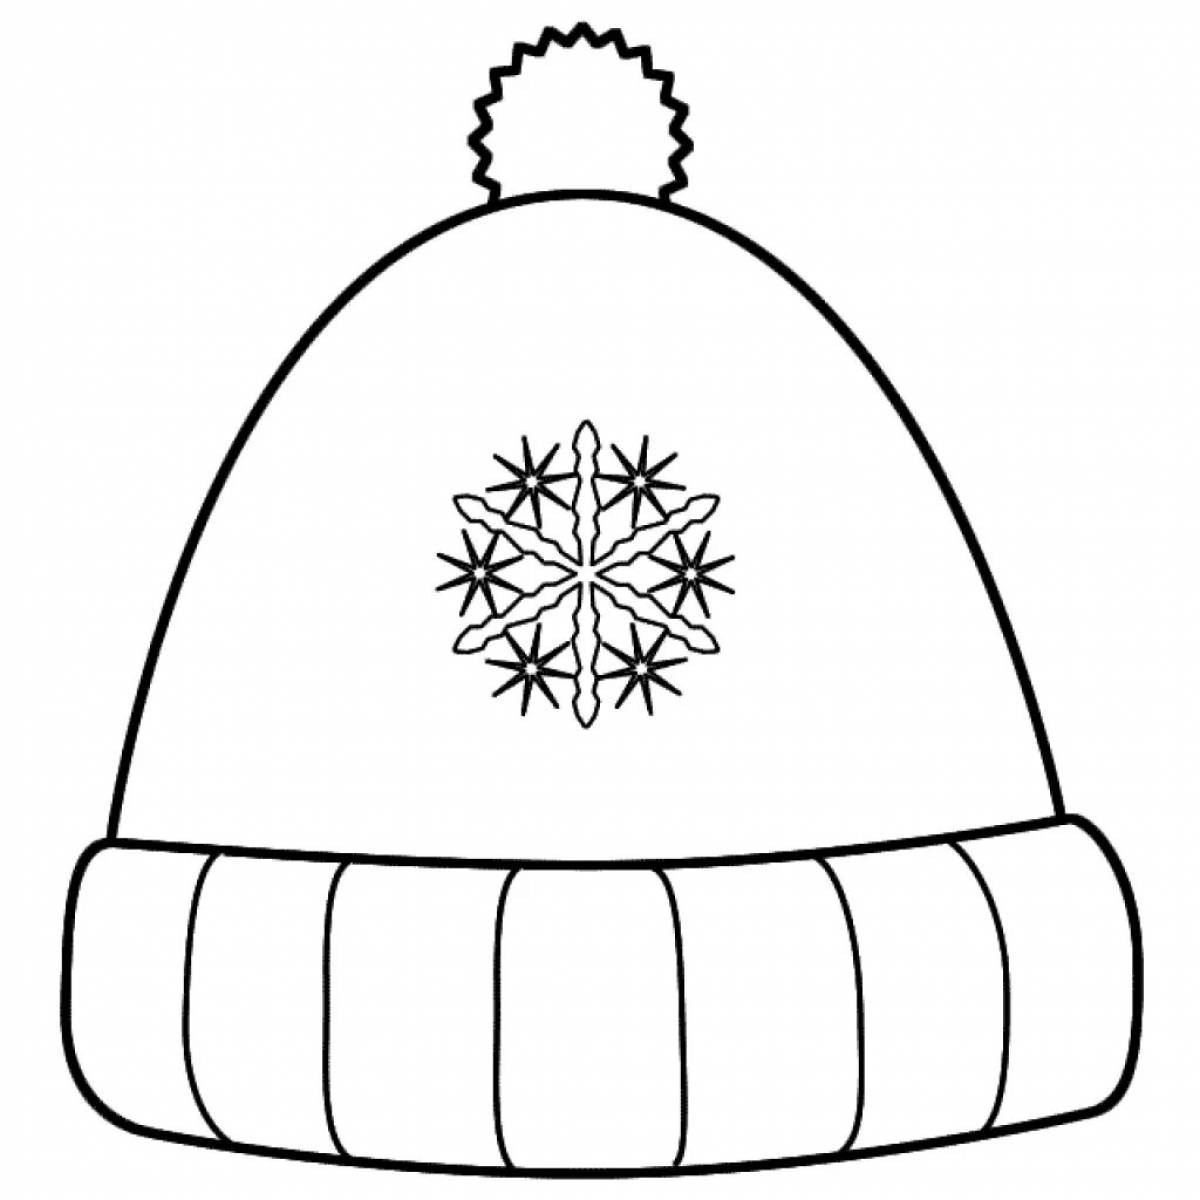 Coloring page stylish hat for schoolchildren